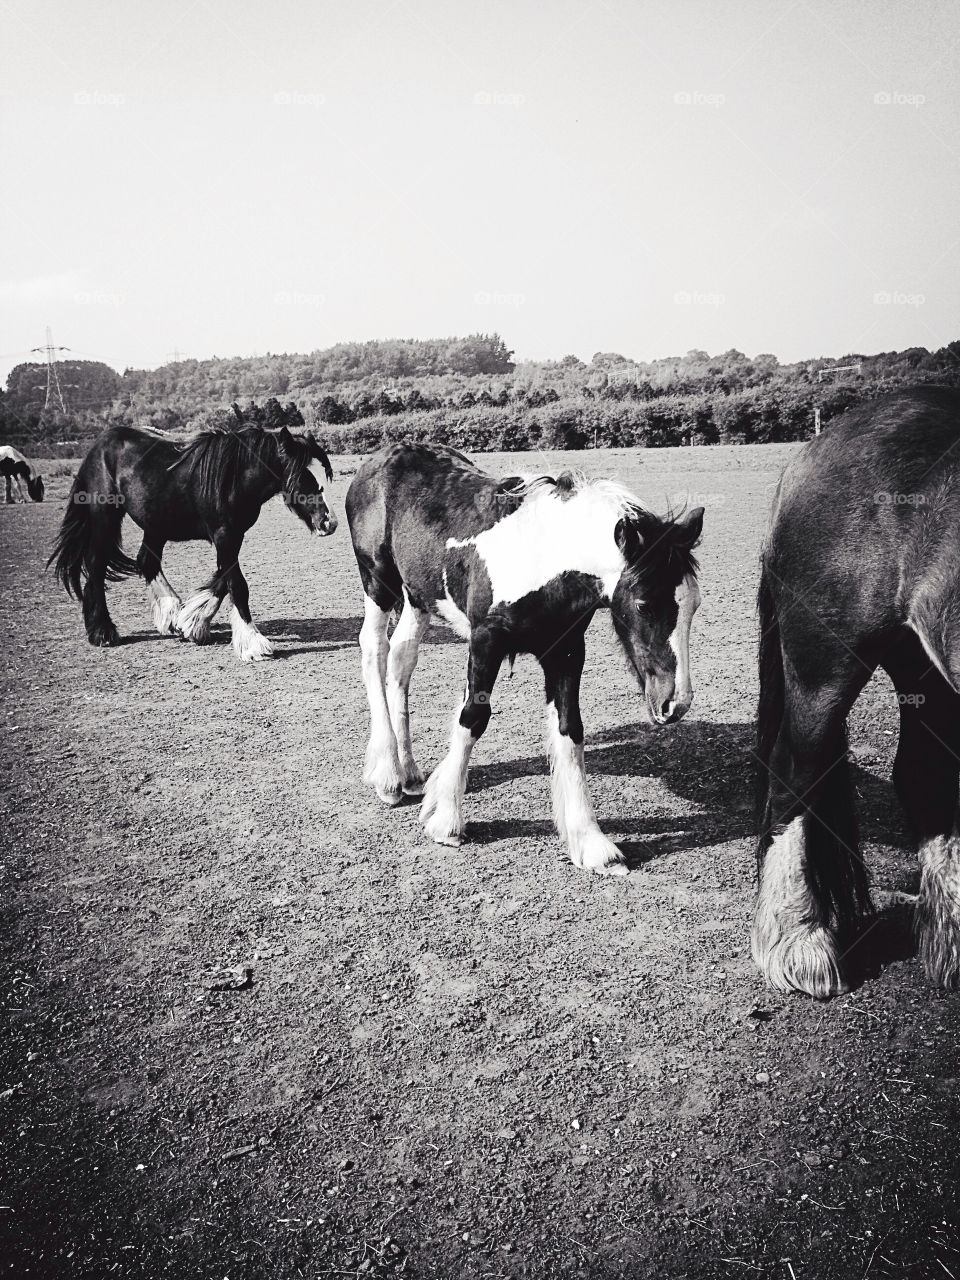 Horses and foal walking in a line